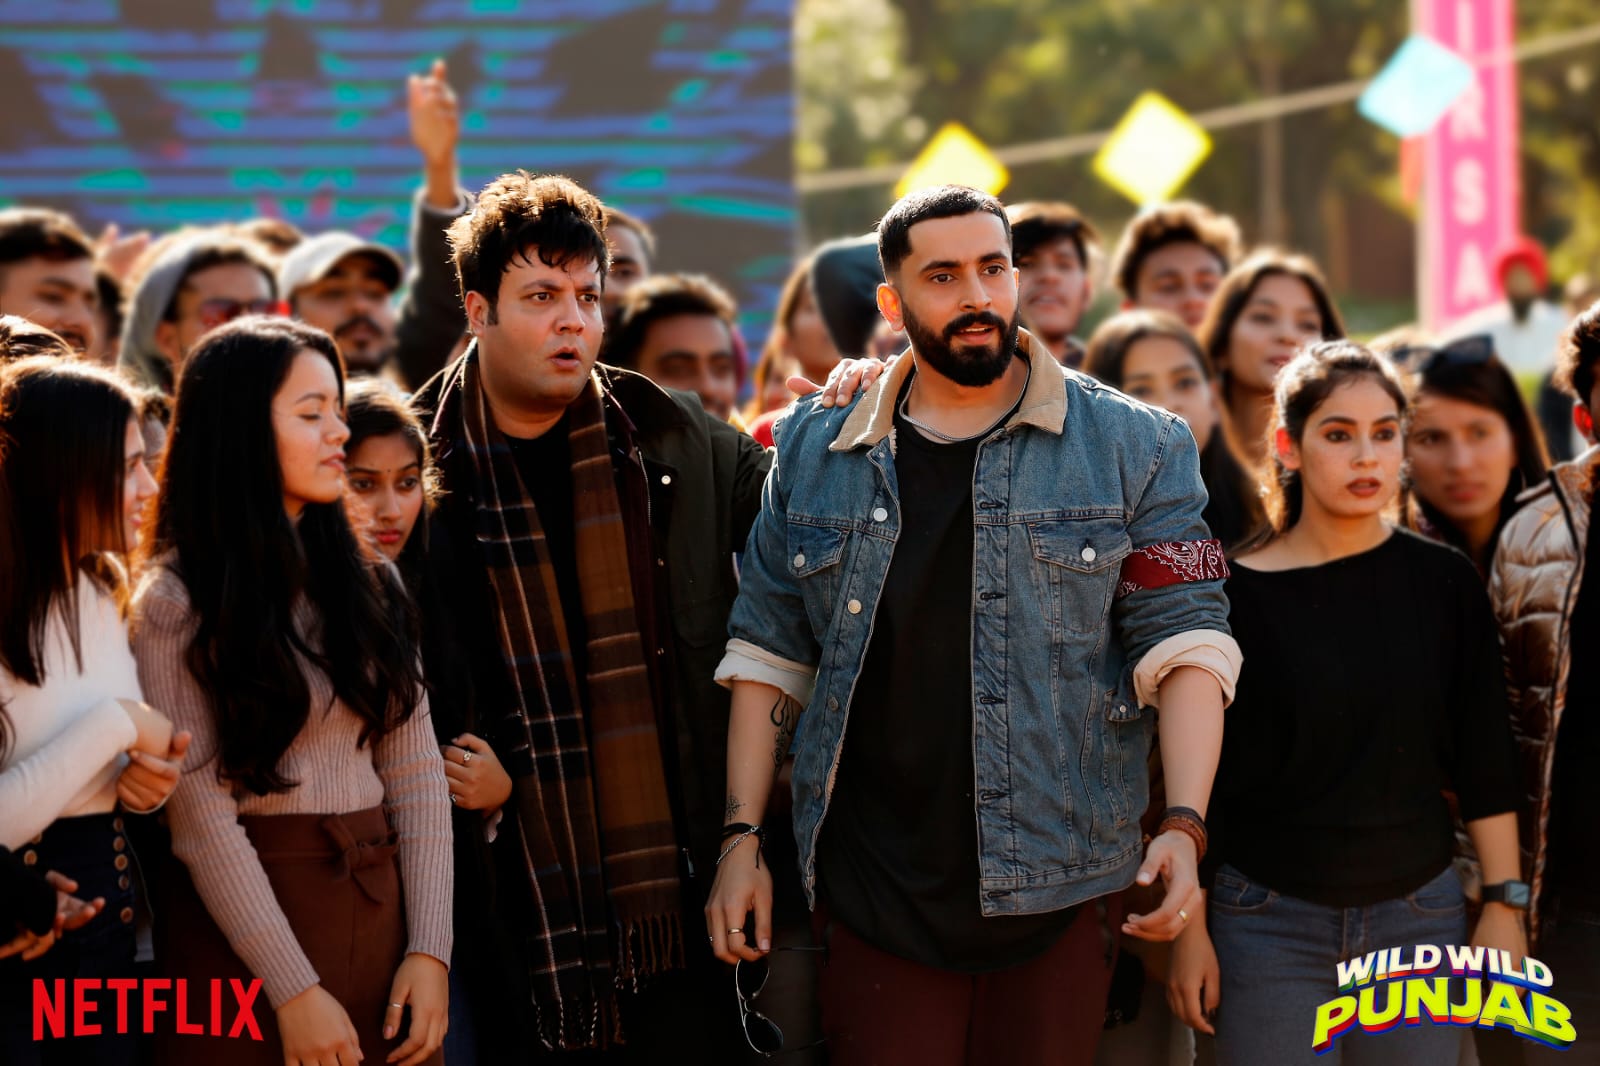 VARUN SHARMA AND SUNNY SINGH SHARE HOW THE CAST BONDED OVER FOOD ON THE SET OF NETFLIX’S 'WILD WILD PUNJAB